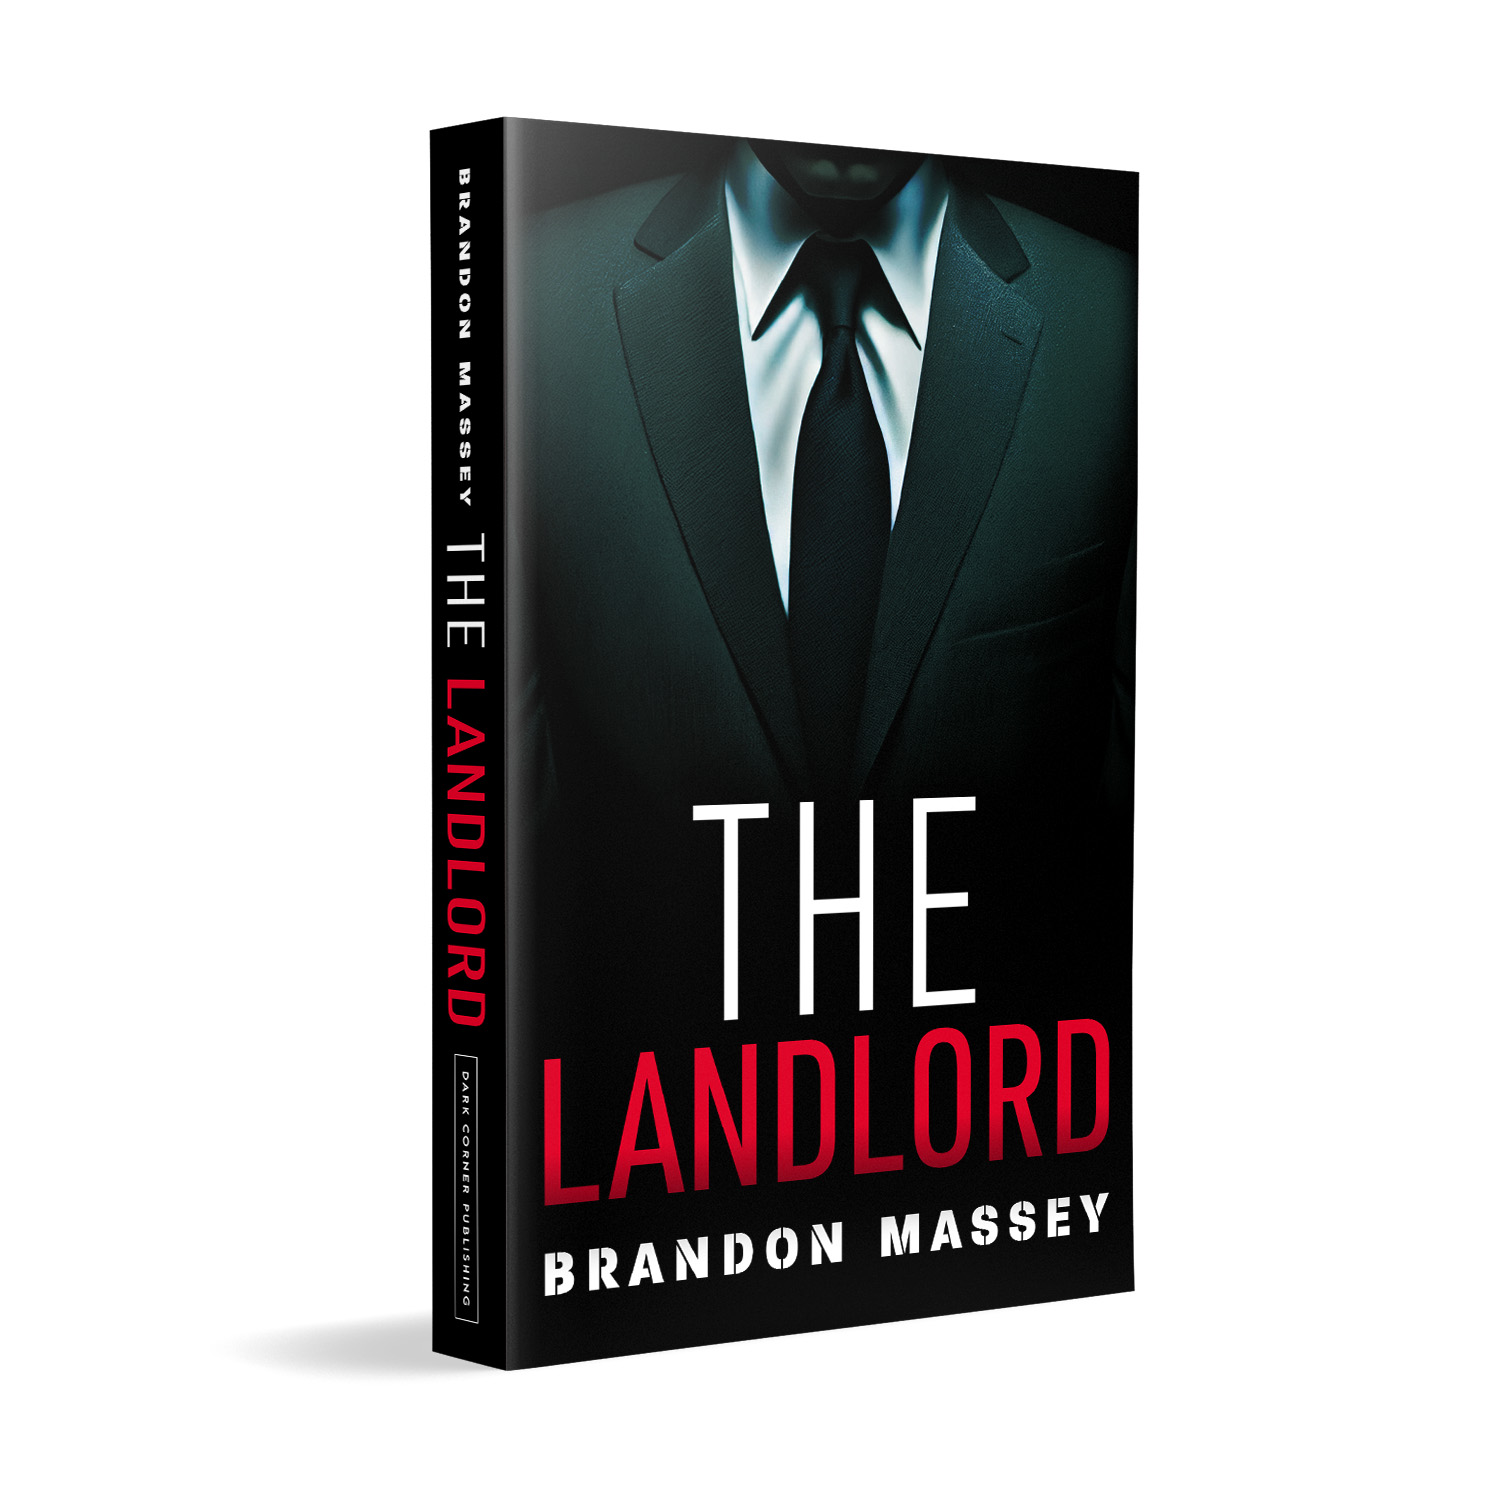 'The Landlord' is a chilling modern domestic thriller. The author is Brandon Massey. The book cover design is by Mark Thomas. To learn more about what Mark could do for your book, please visit coverness.com.